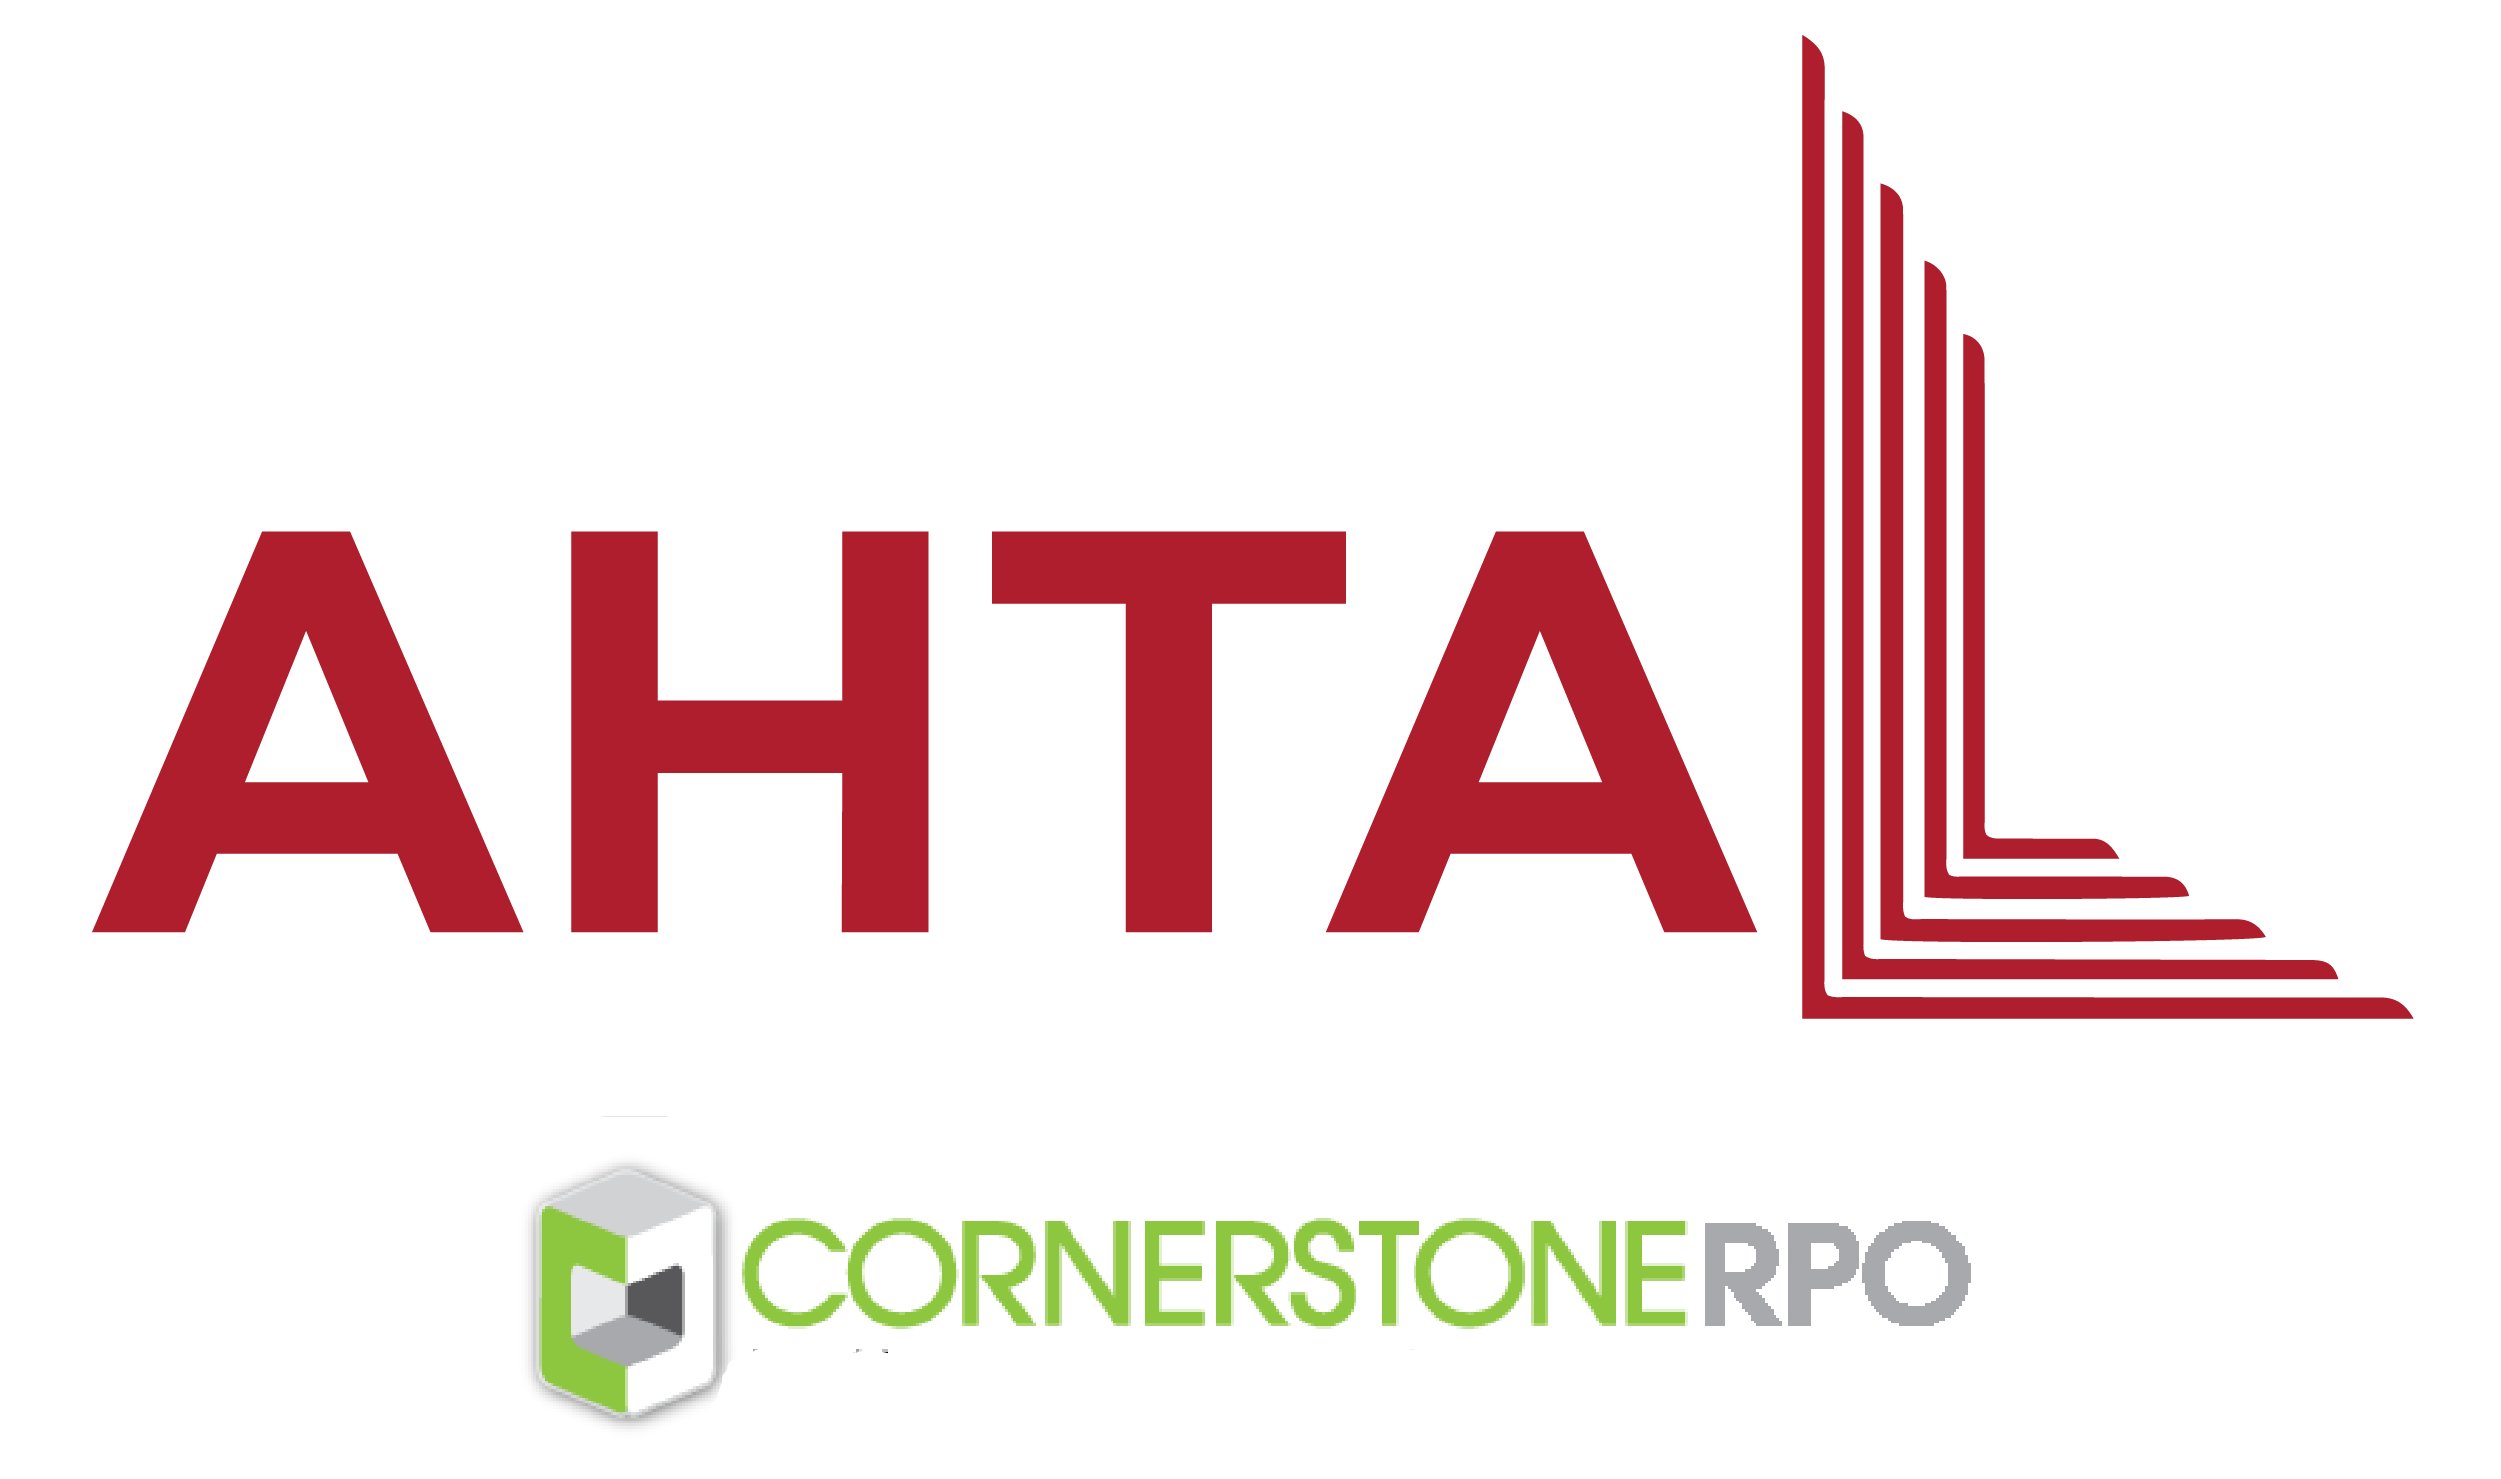 American Hospitality Talent Acquisition